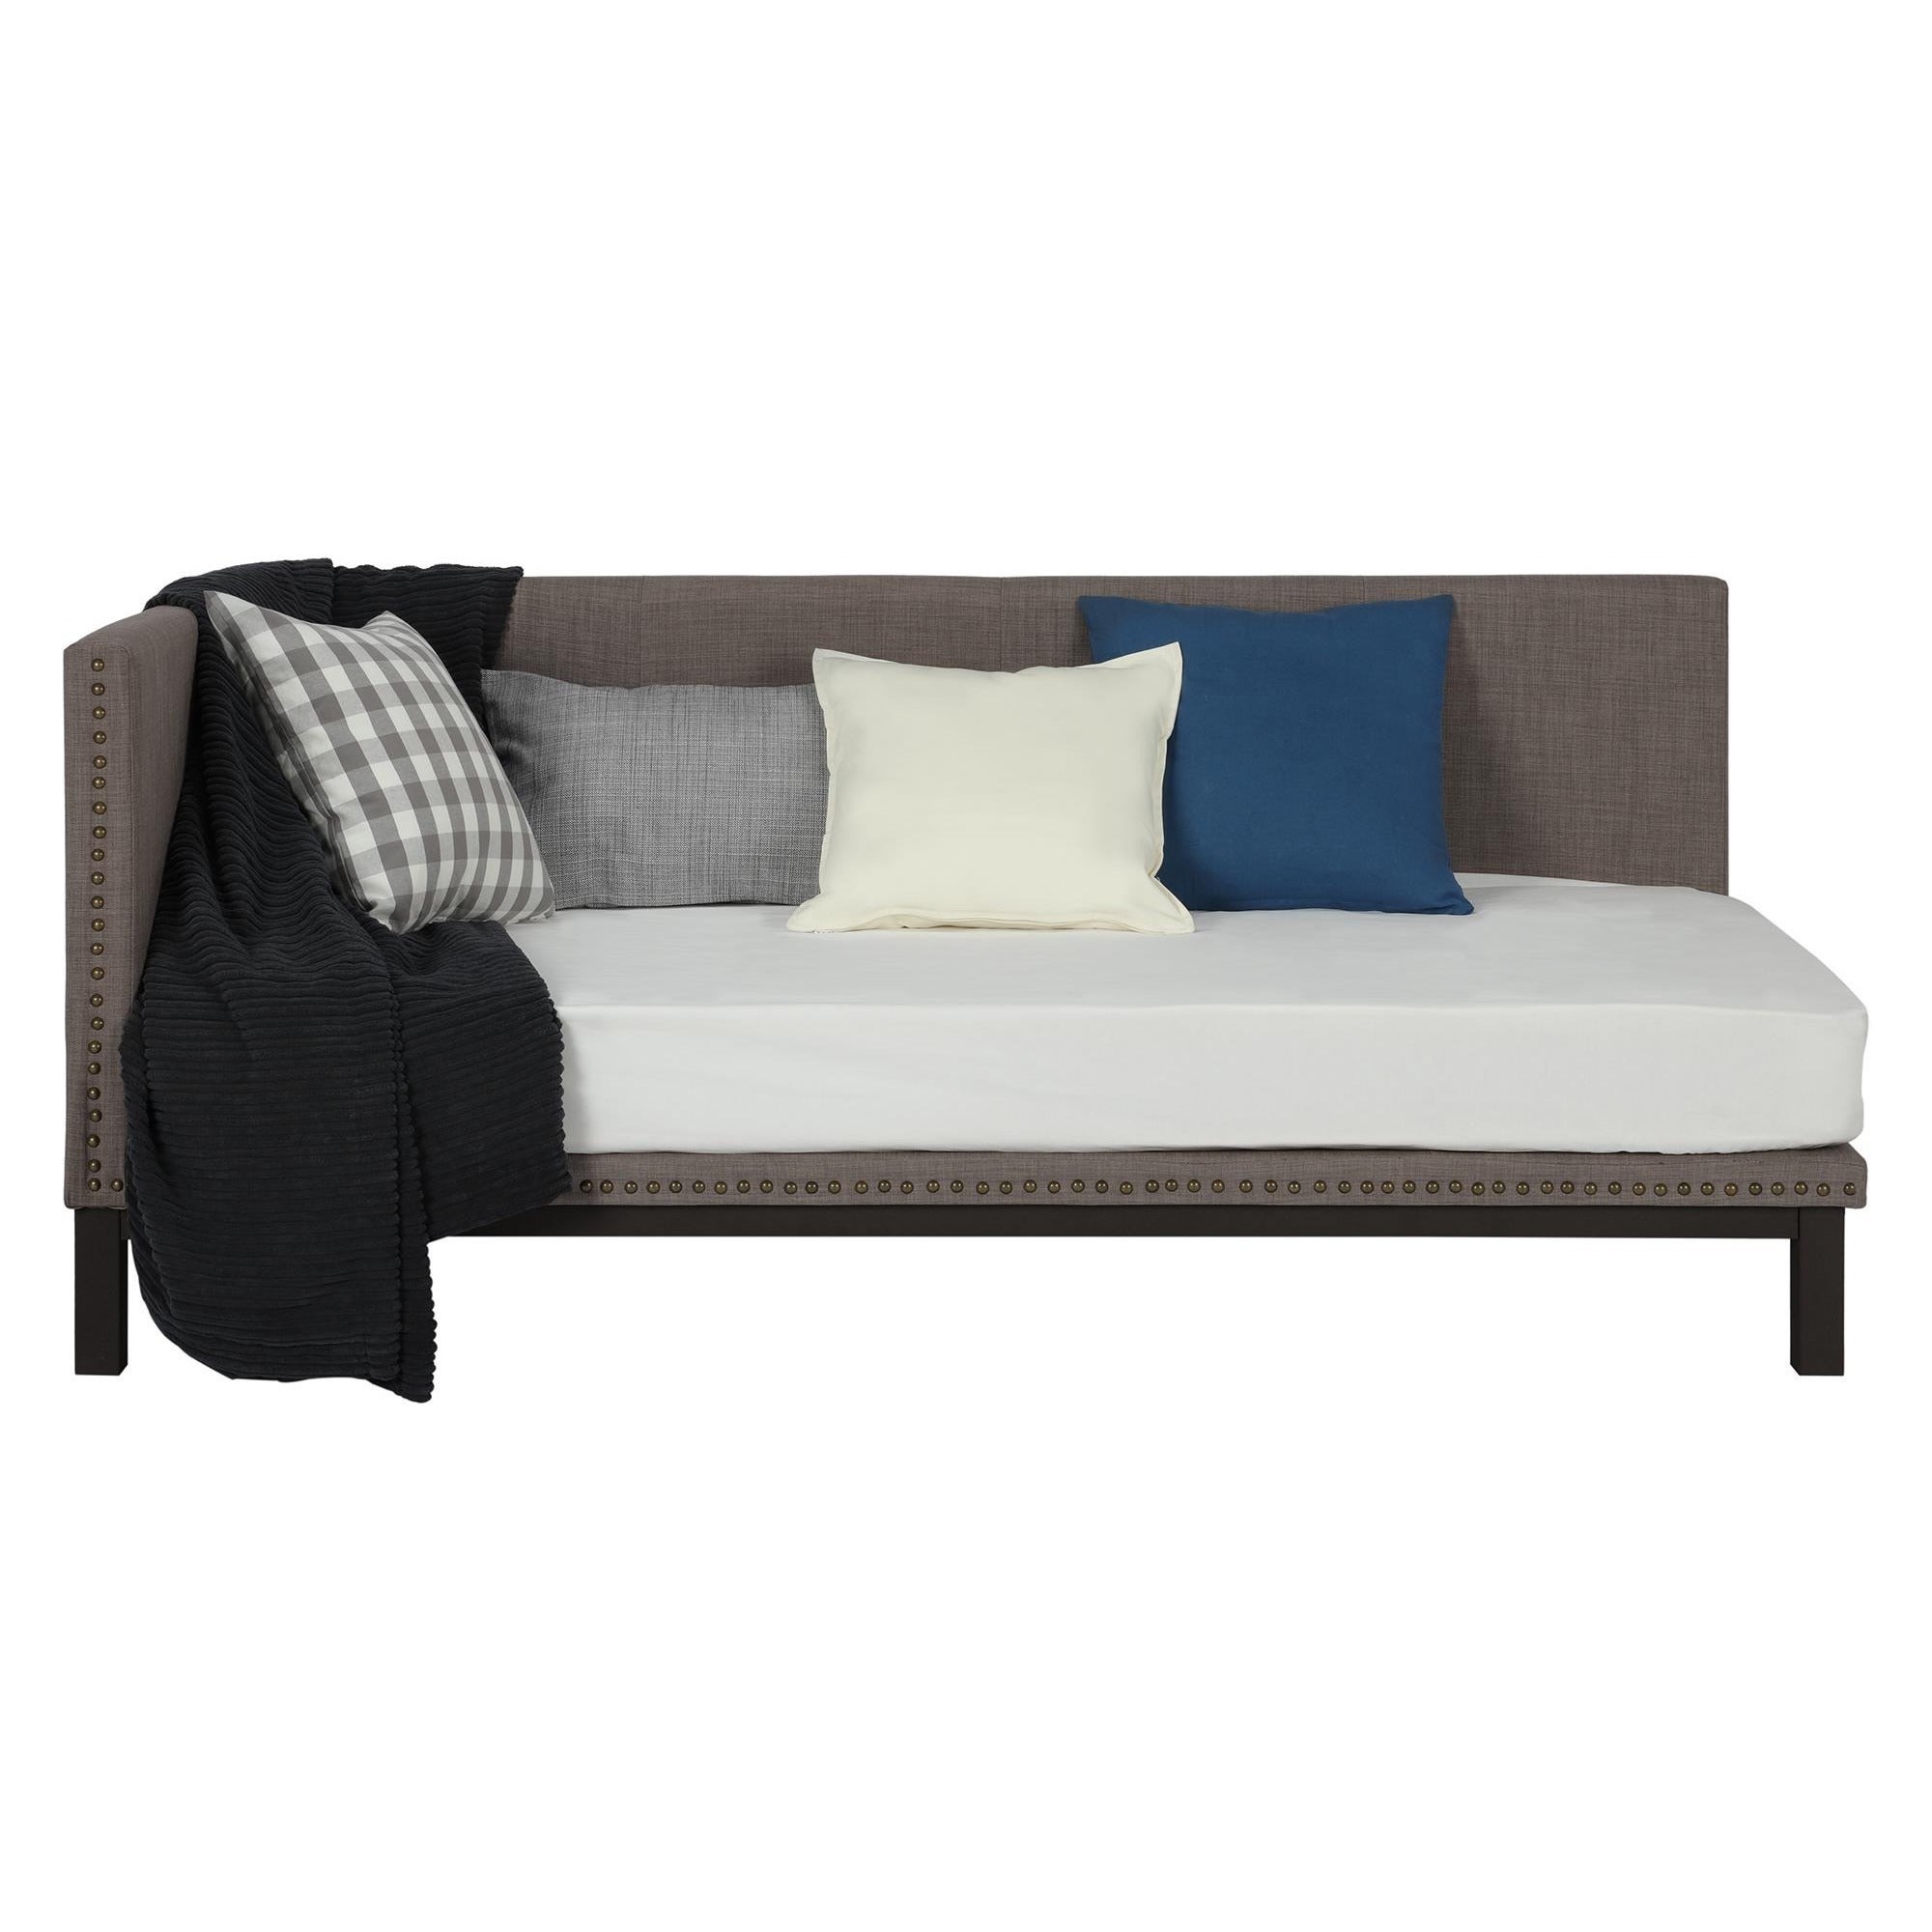 2109 Copper Grove Alty Mid-century Grey Upholstered Modern Daybed 8